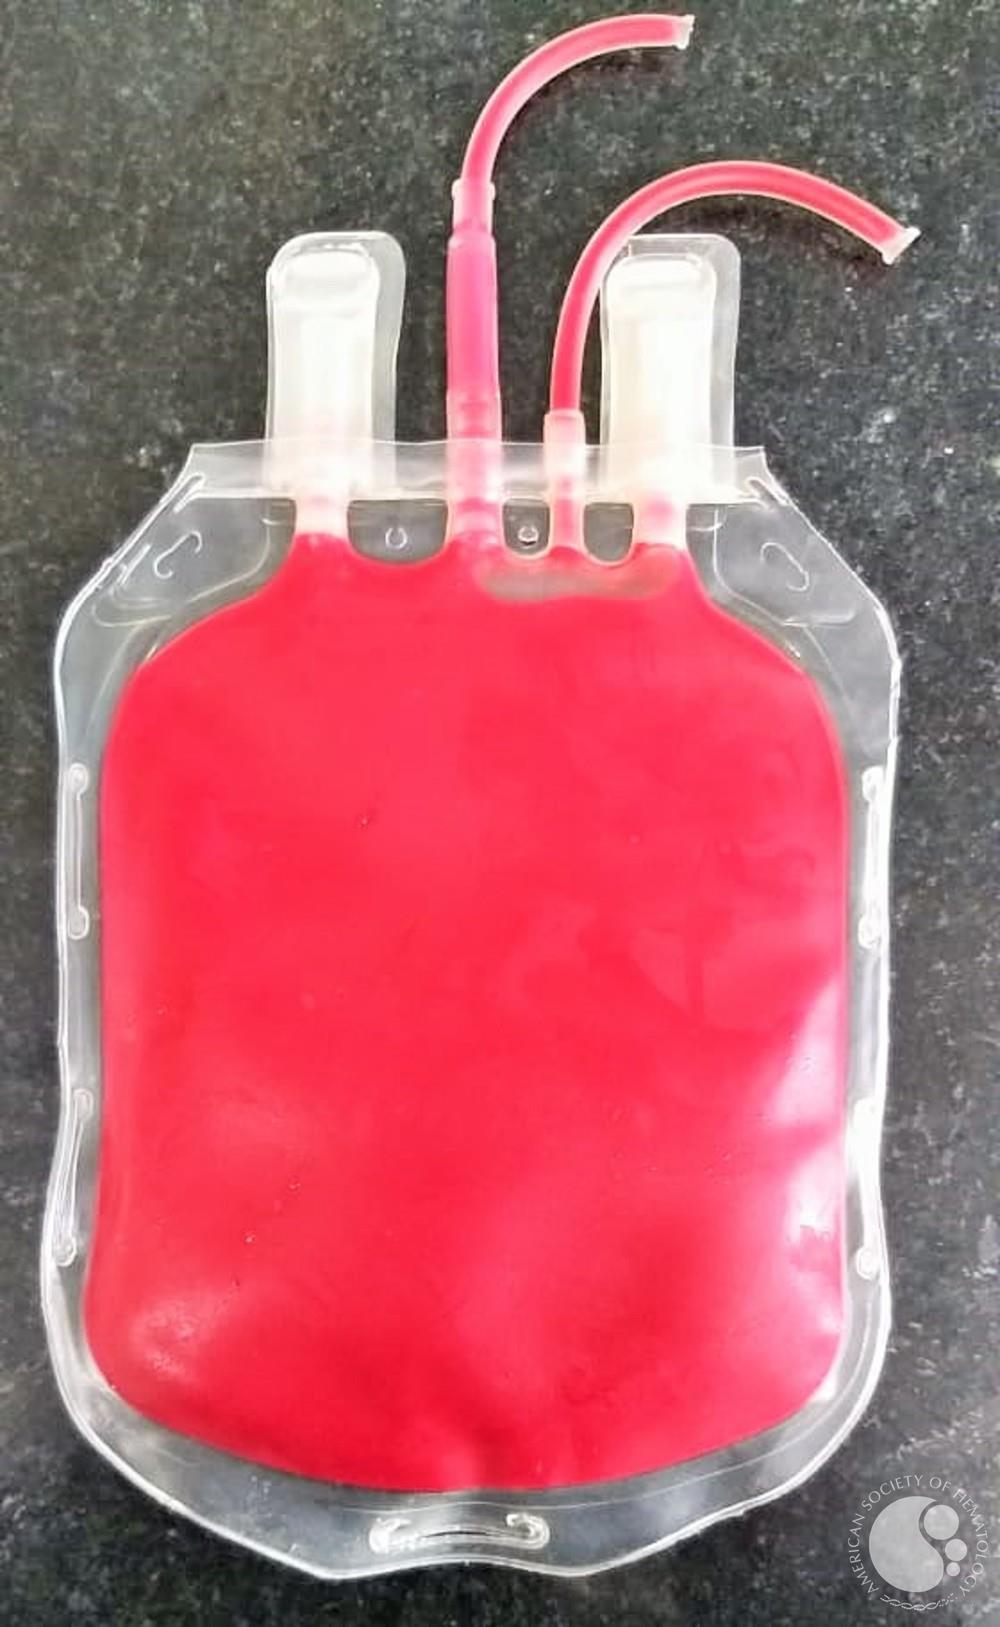 Cherry Red Discoloration of Blood Unit